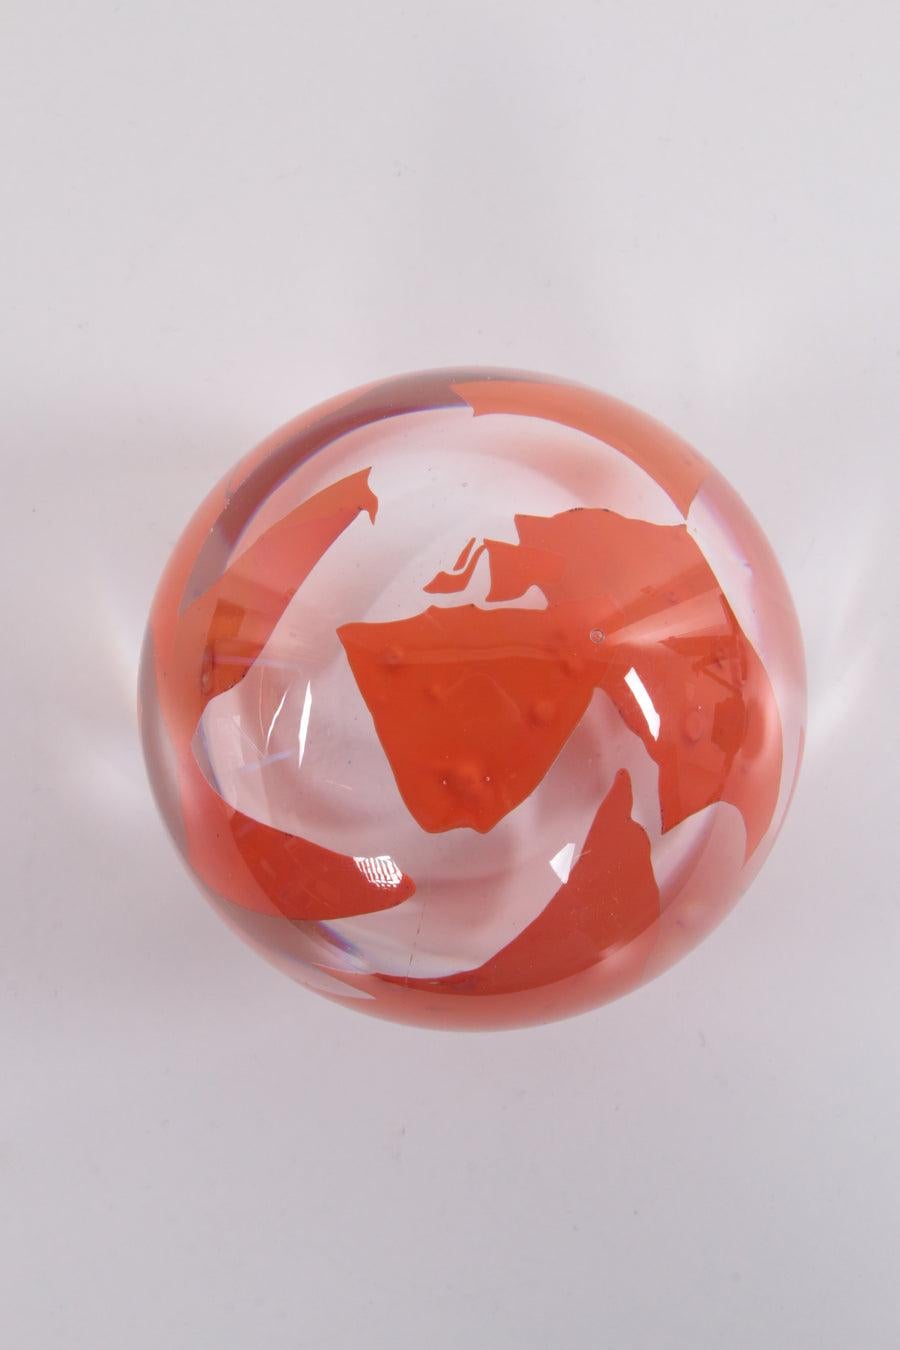 Paperweight Orange with Van Granna Glasbruk Sweden, 



Additional information: 
Dimensions: 9 W x 9 D x 9 H cm 
Period of Time: 2005
Country of origin: Sweden
Condition: Good
